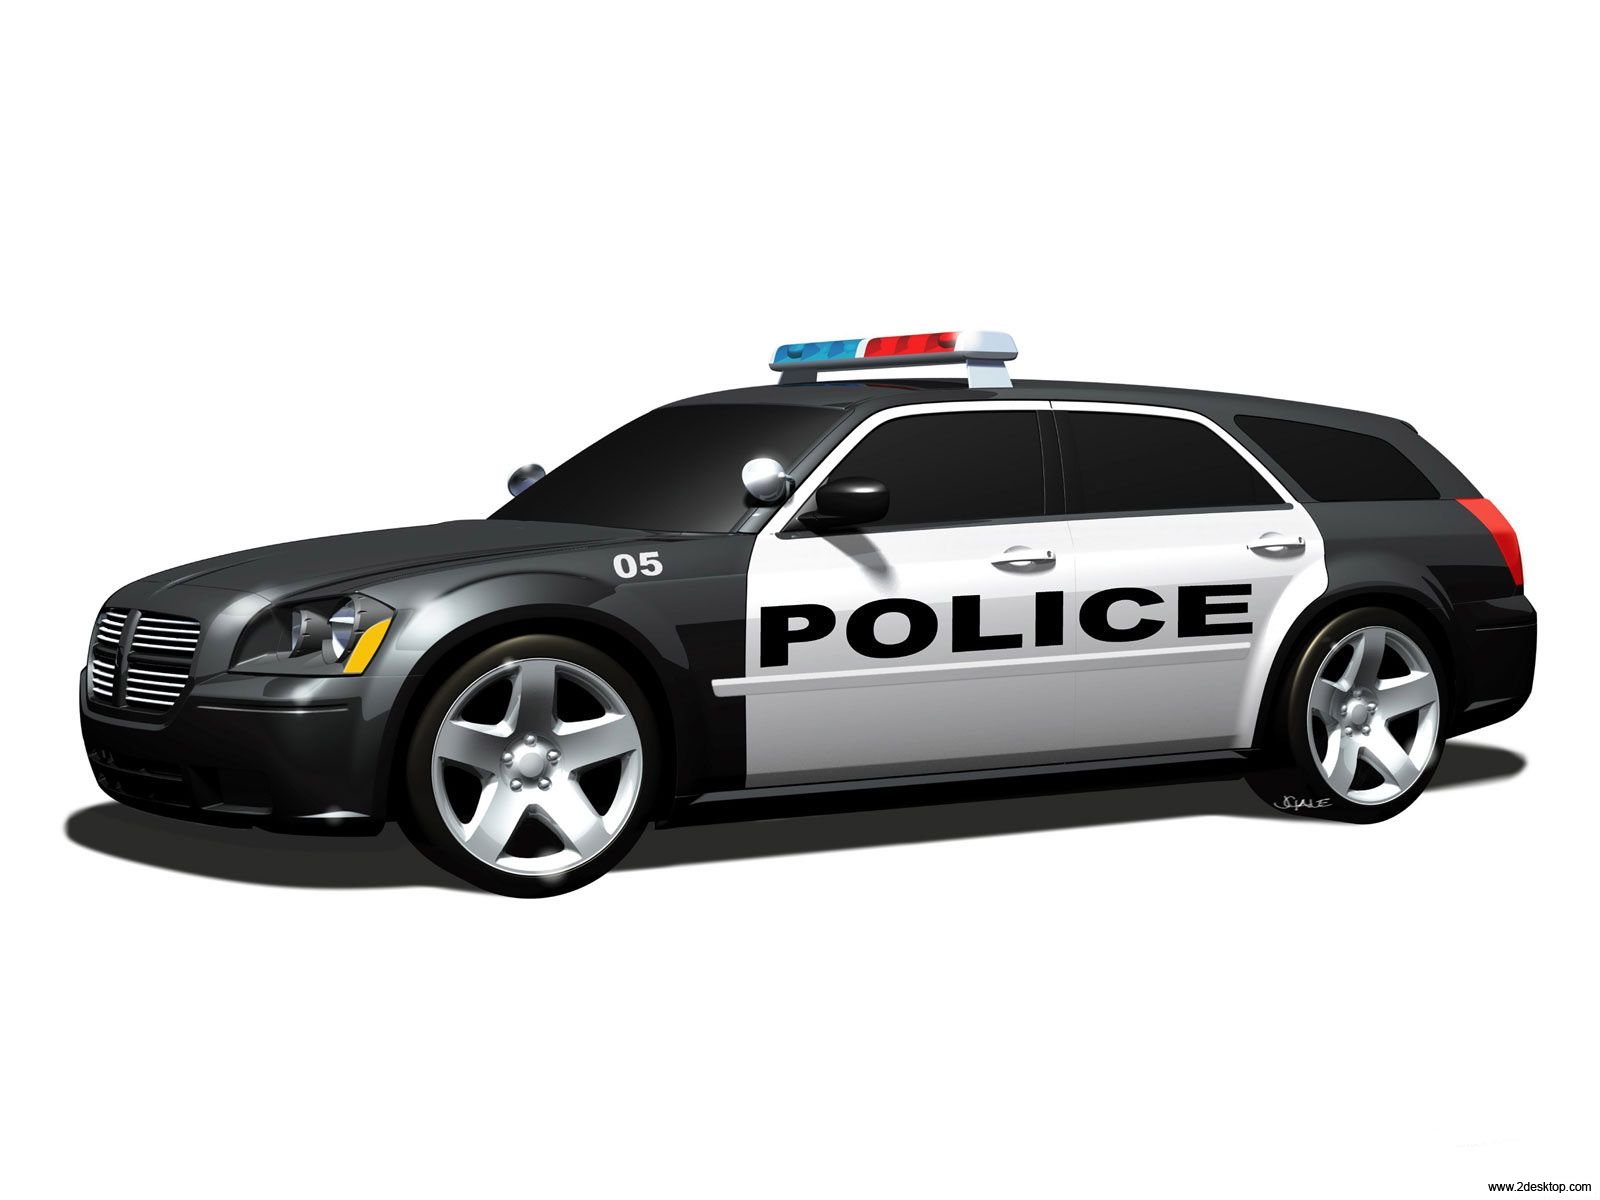 Police Car Free Images At Clkercom Vector Clip Art Online